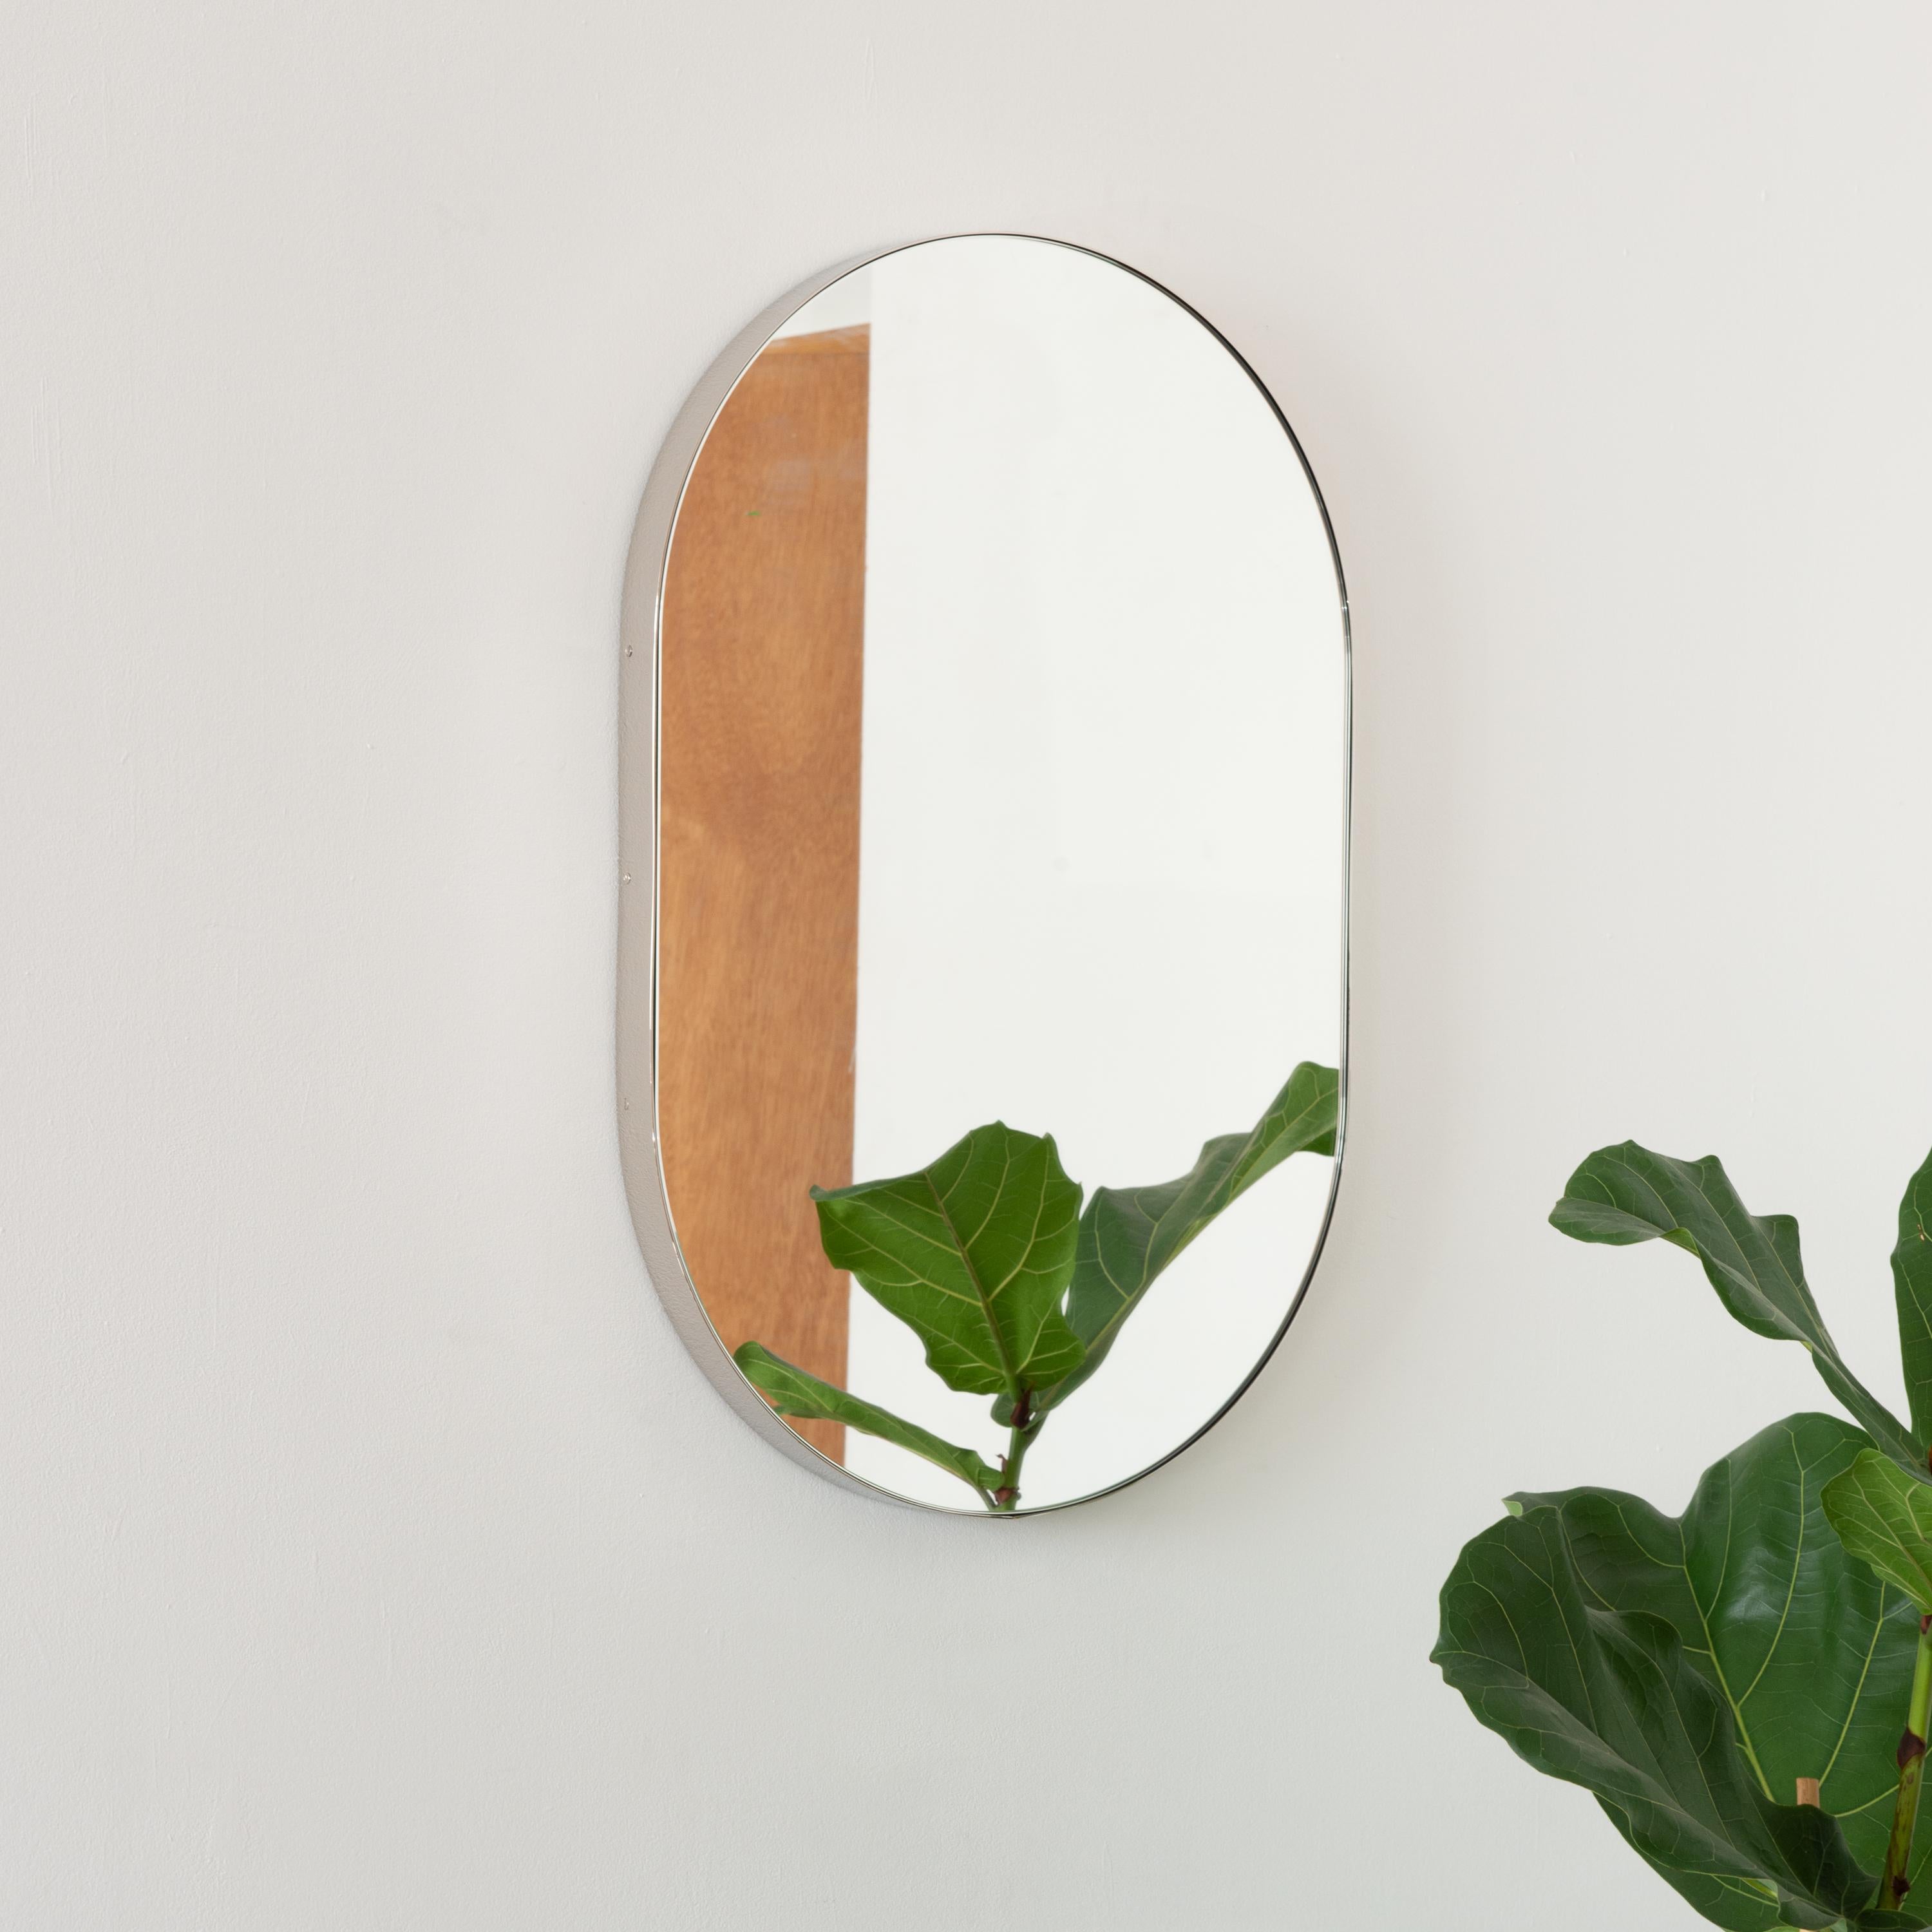 Chic capsule shaped mirror with an elegant nickel plated frame. Designed and handcrafted in London, UK.

Our mirrors are designed with an integrated French cleat (split batten) system that ensures the mirror is securely mounted flush with the wall.